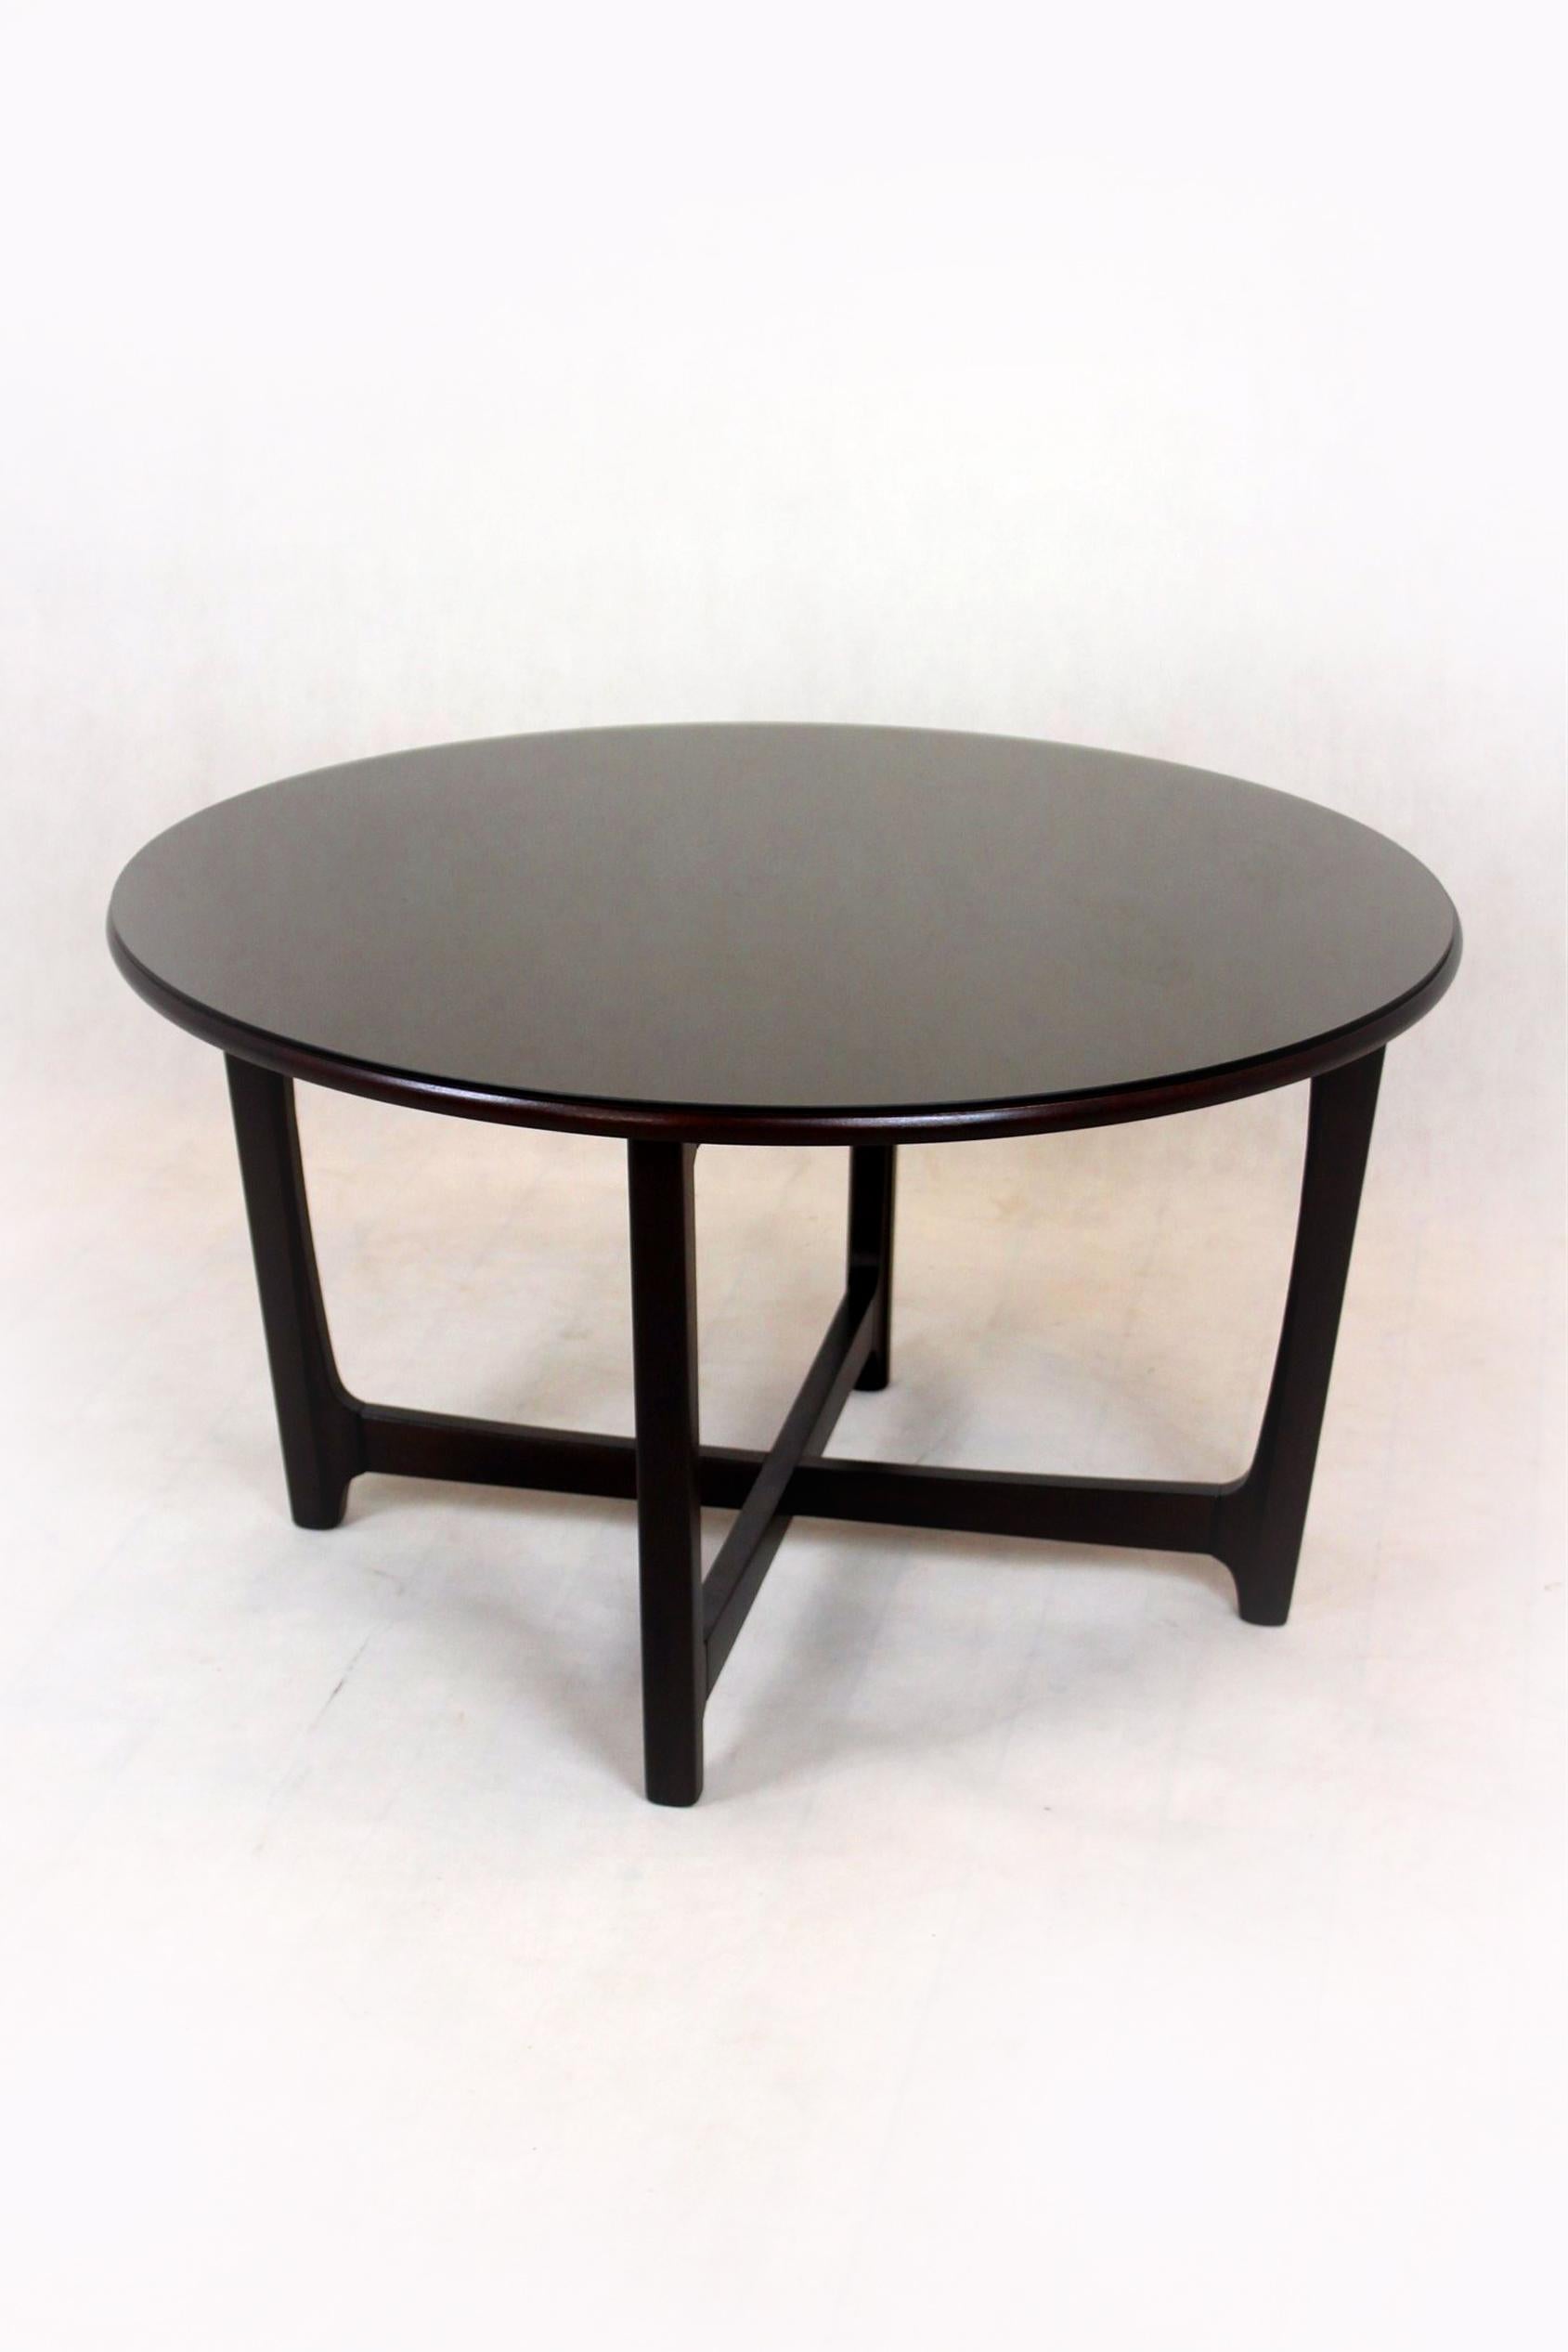 Restored Wooden Round Coffee Table, Czechoslovakia, 1970s For Sale 1